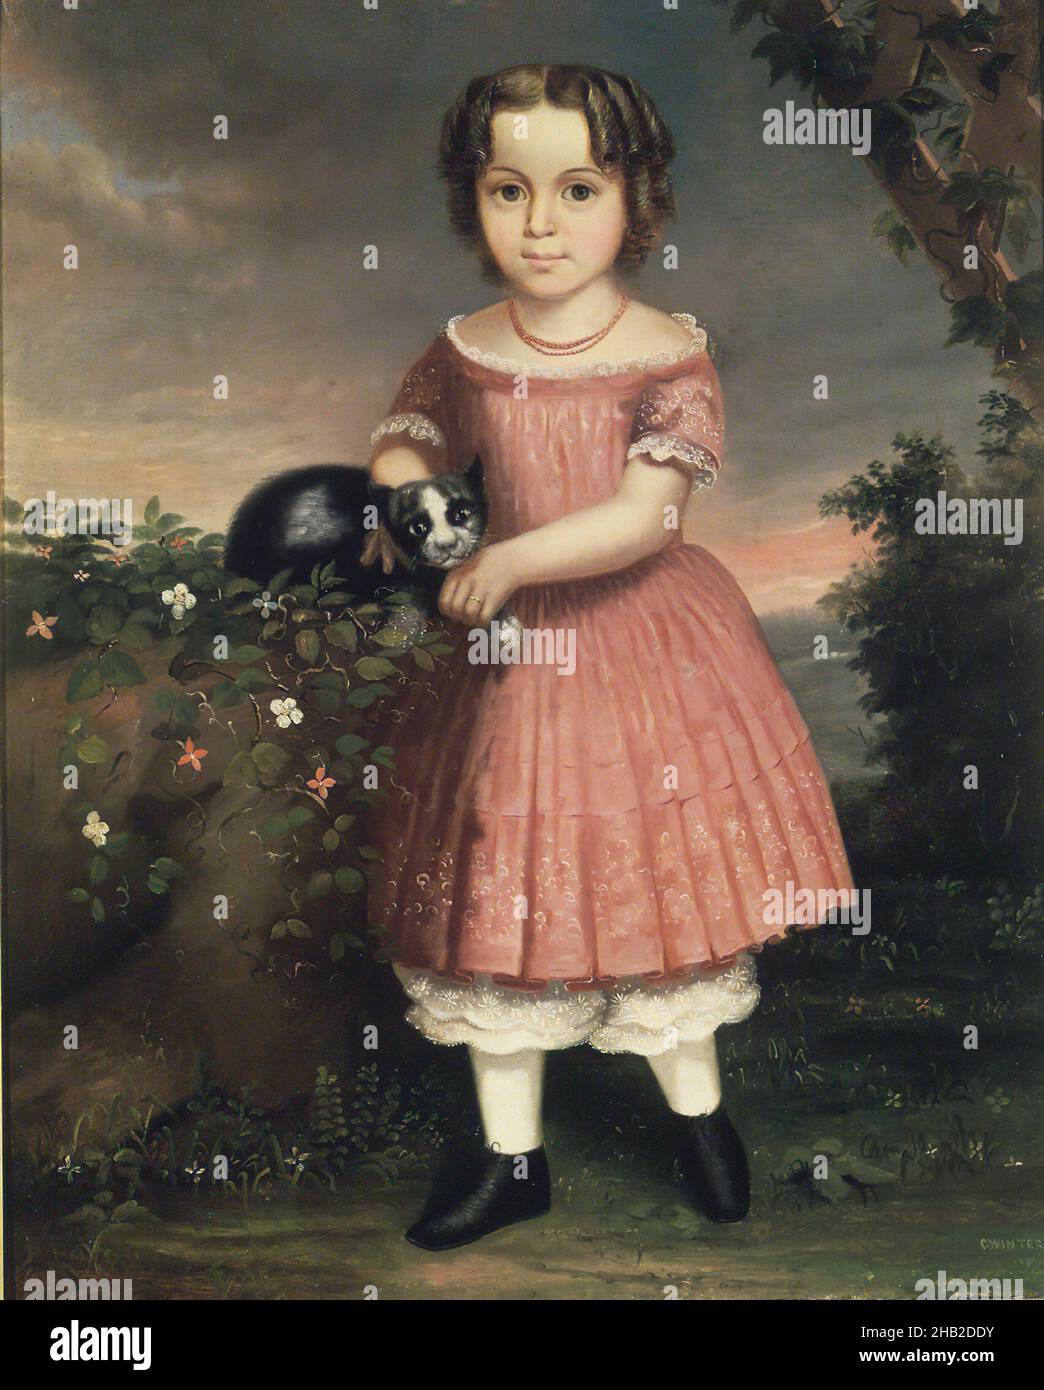 Portrait of a Child Holding a Cat, Probably Charles Winter, American, born ca. 1825, Oil on canvas, 1851, 36 3/16 x 29 1/8 in., 91.9 x 73.9 cm, American, black cat, bloomers, Cane Acres Plantation House, cat, cats, Charles Winter, childhood, domestic cat, early American, feline, kitten, little girl, oil painting, pet, petticoat, portrait, ringlets Stock Photo